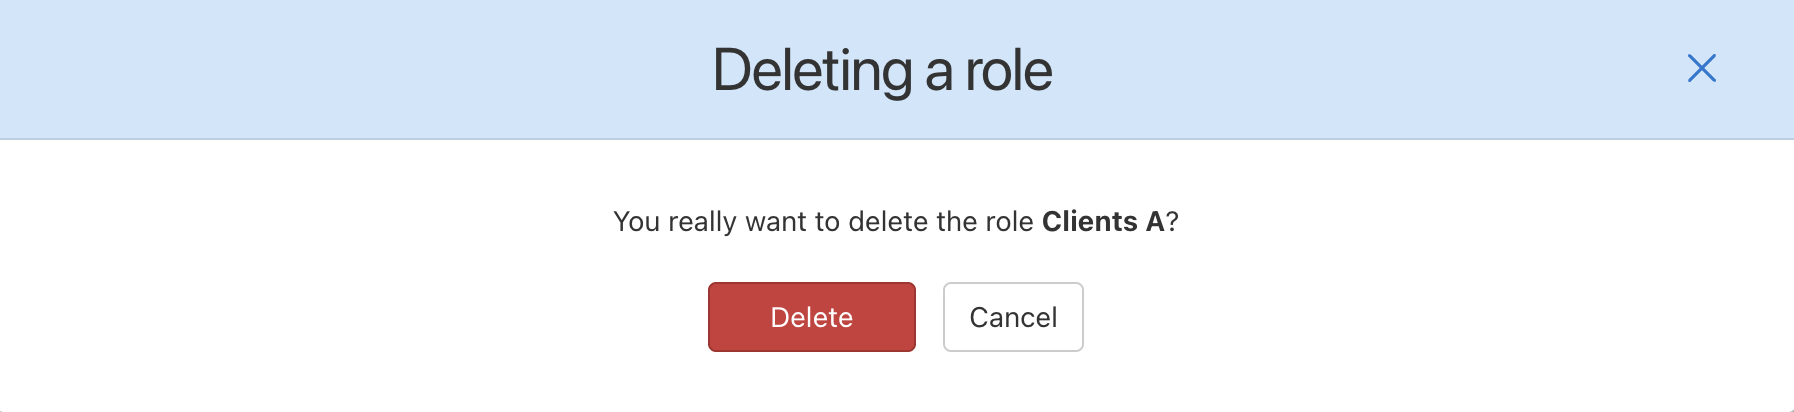 Confirmation request before permanently deleting a role.